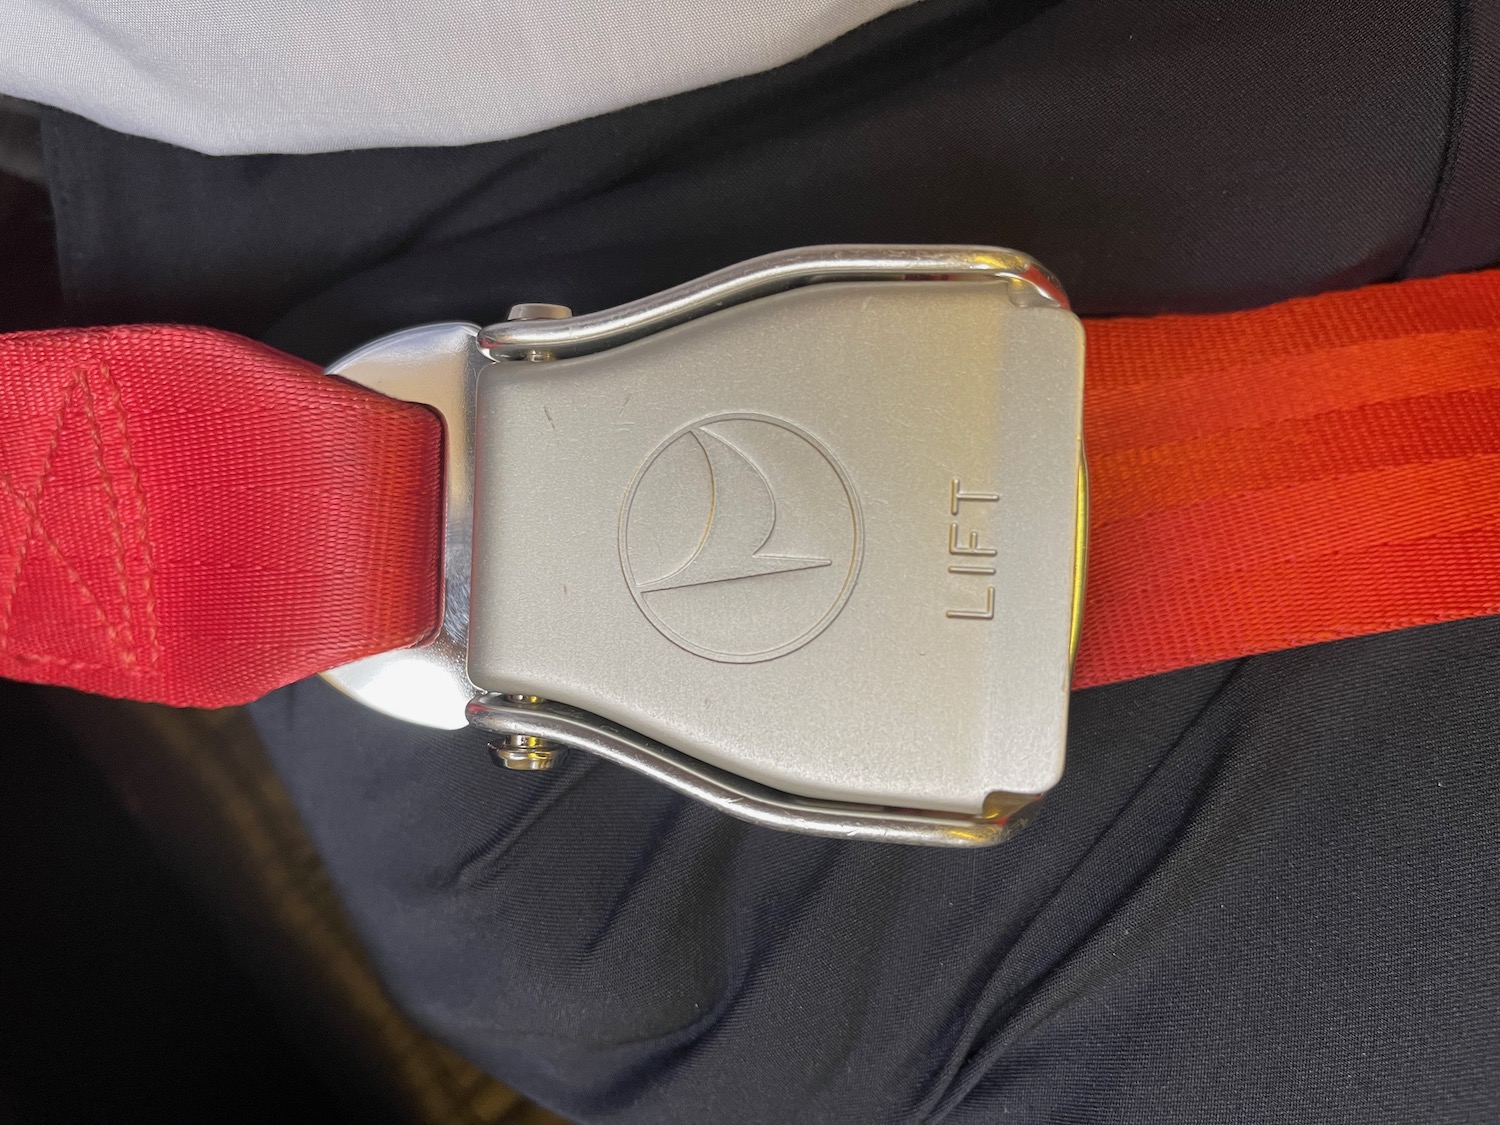 a seat belt on a person's lap